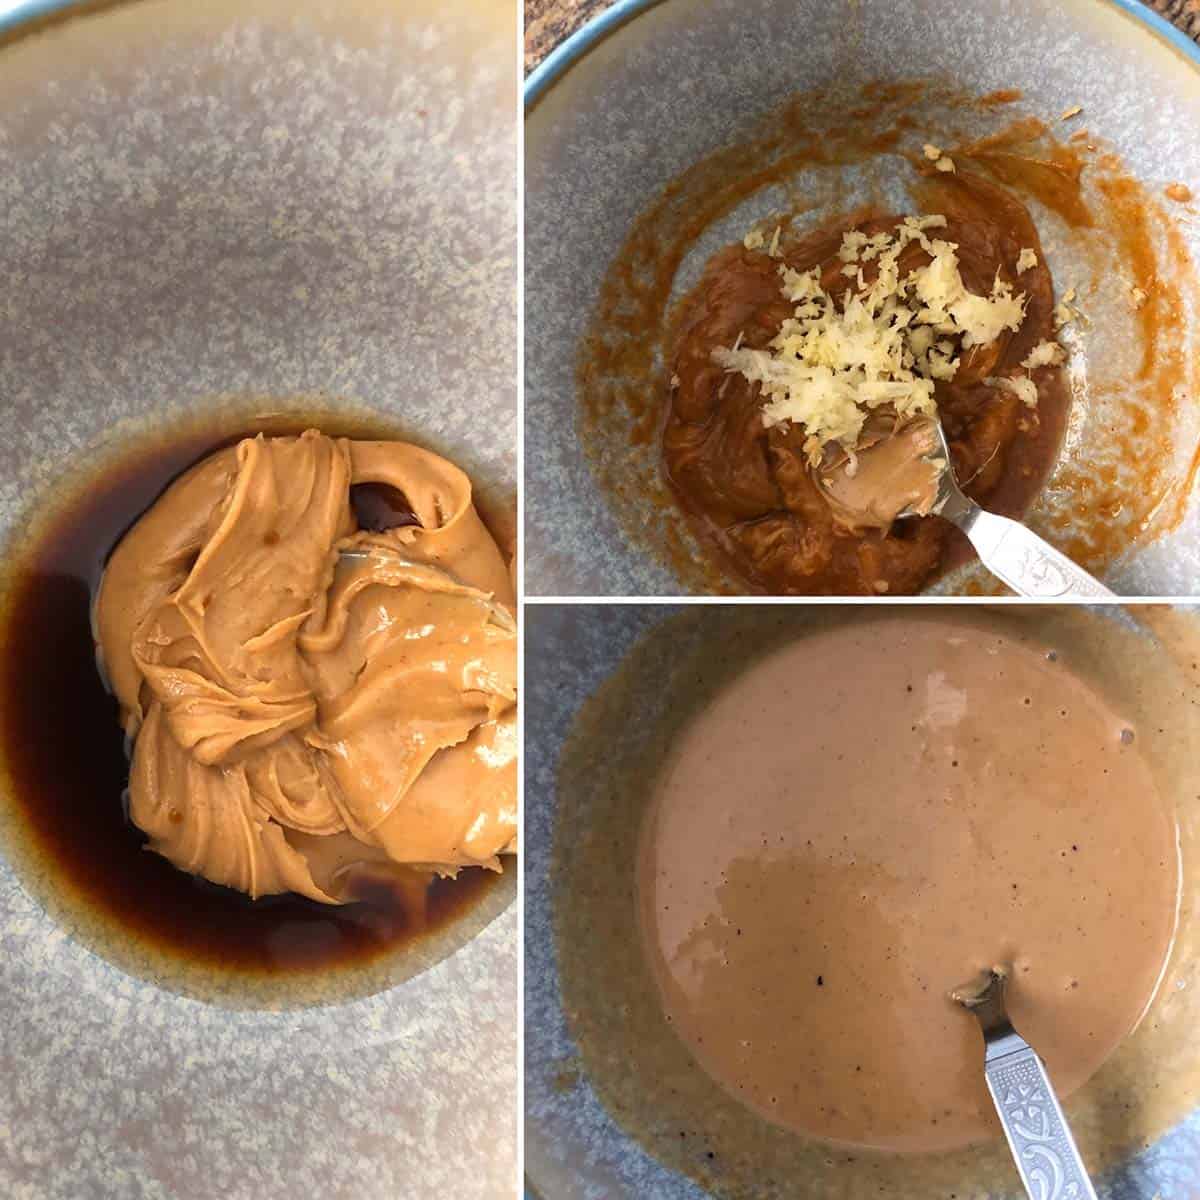 3 panel photo showing the mixing of ingredients to make the dressing.